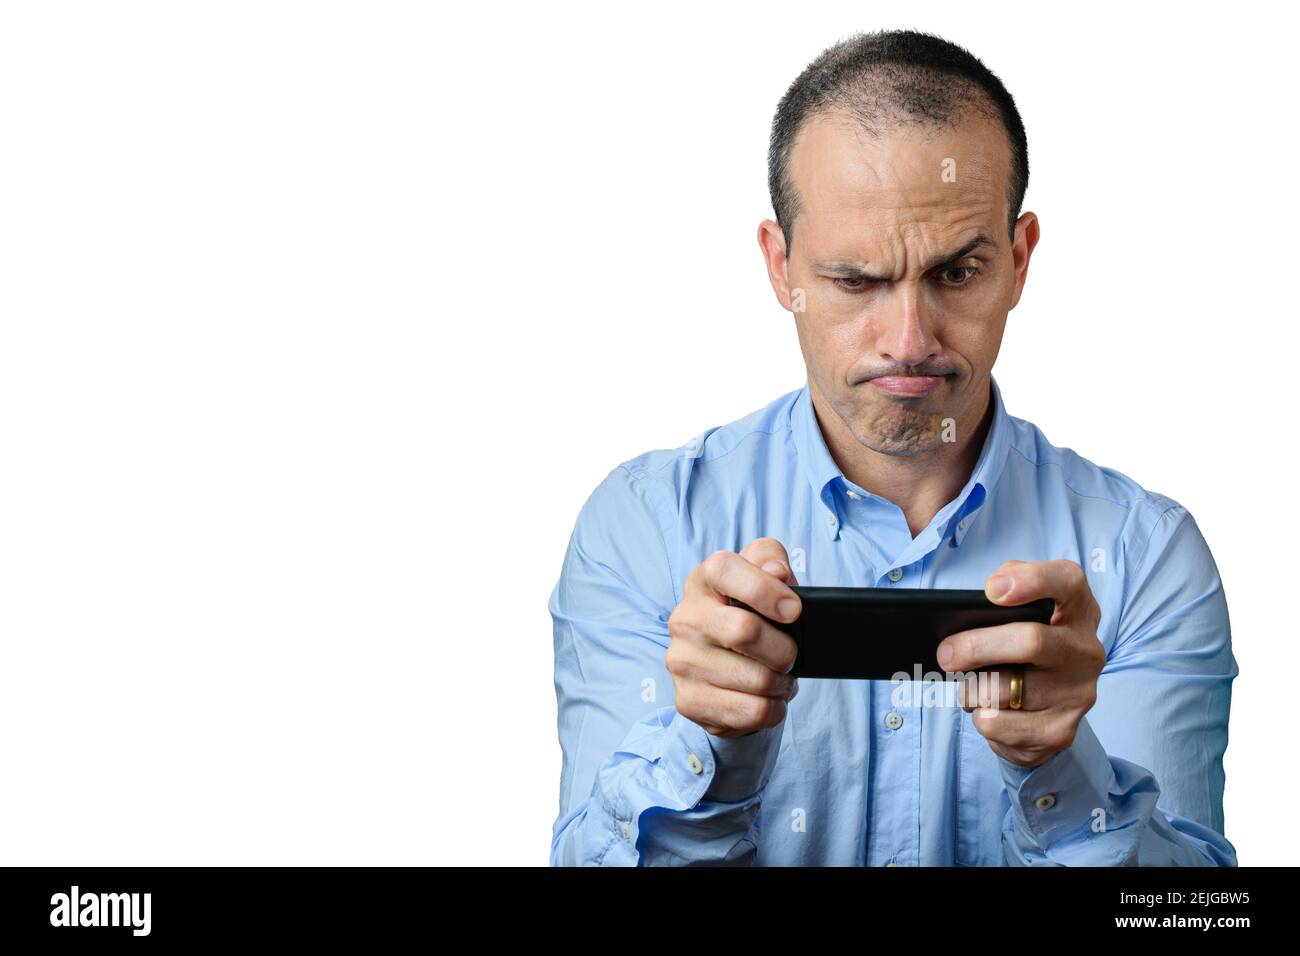 Mature man in formal wear looking at his smartphone and biting his upper lip. Stock Photo